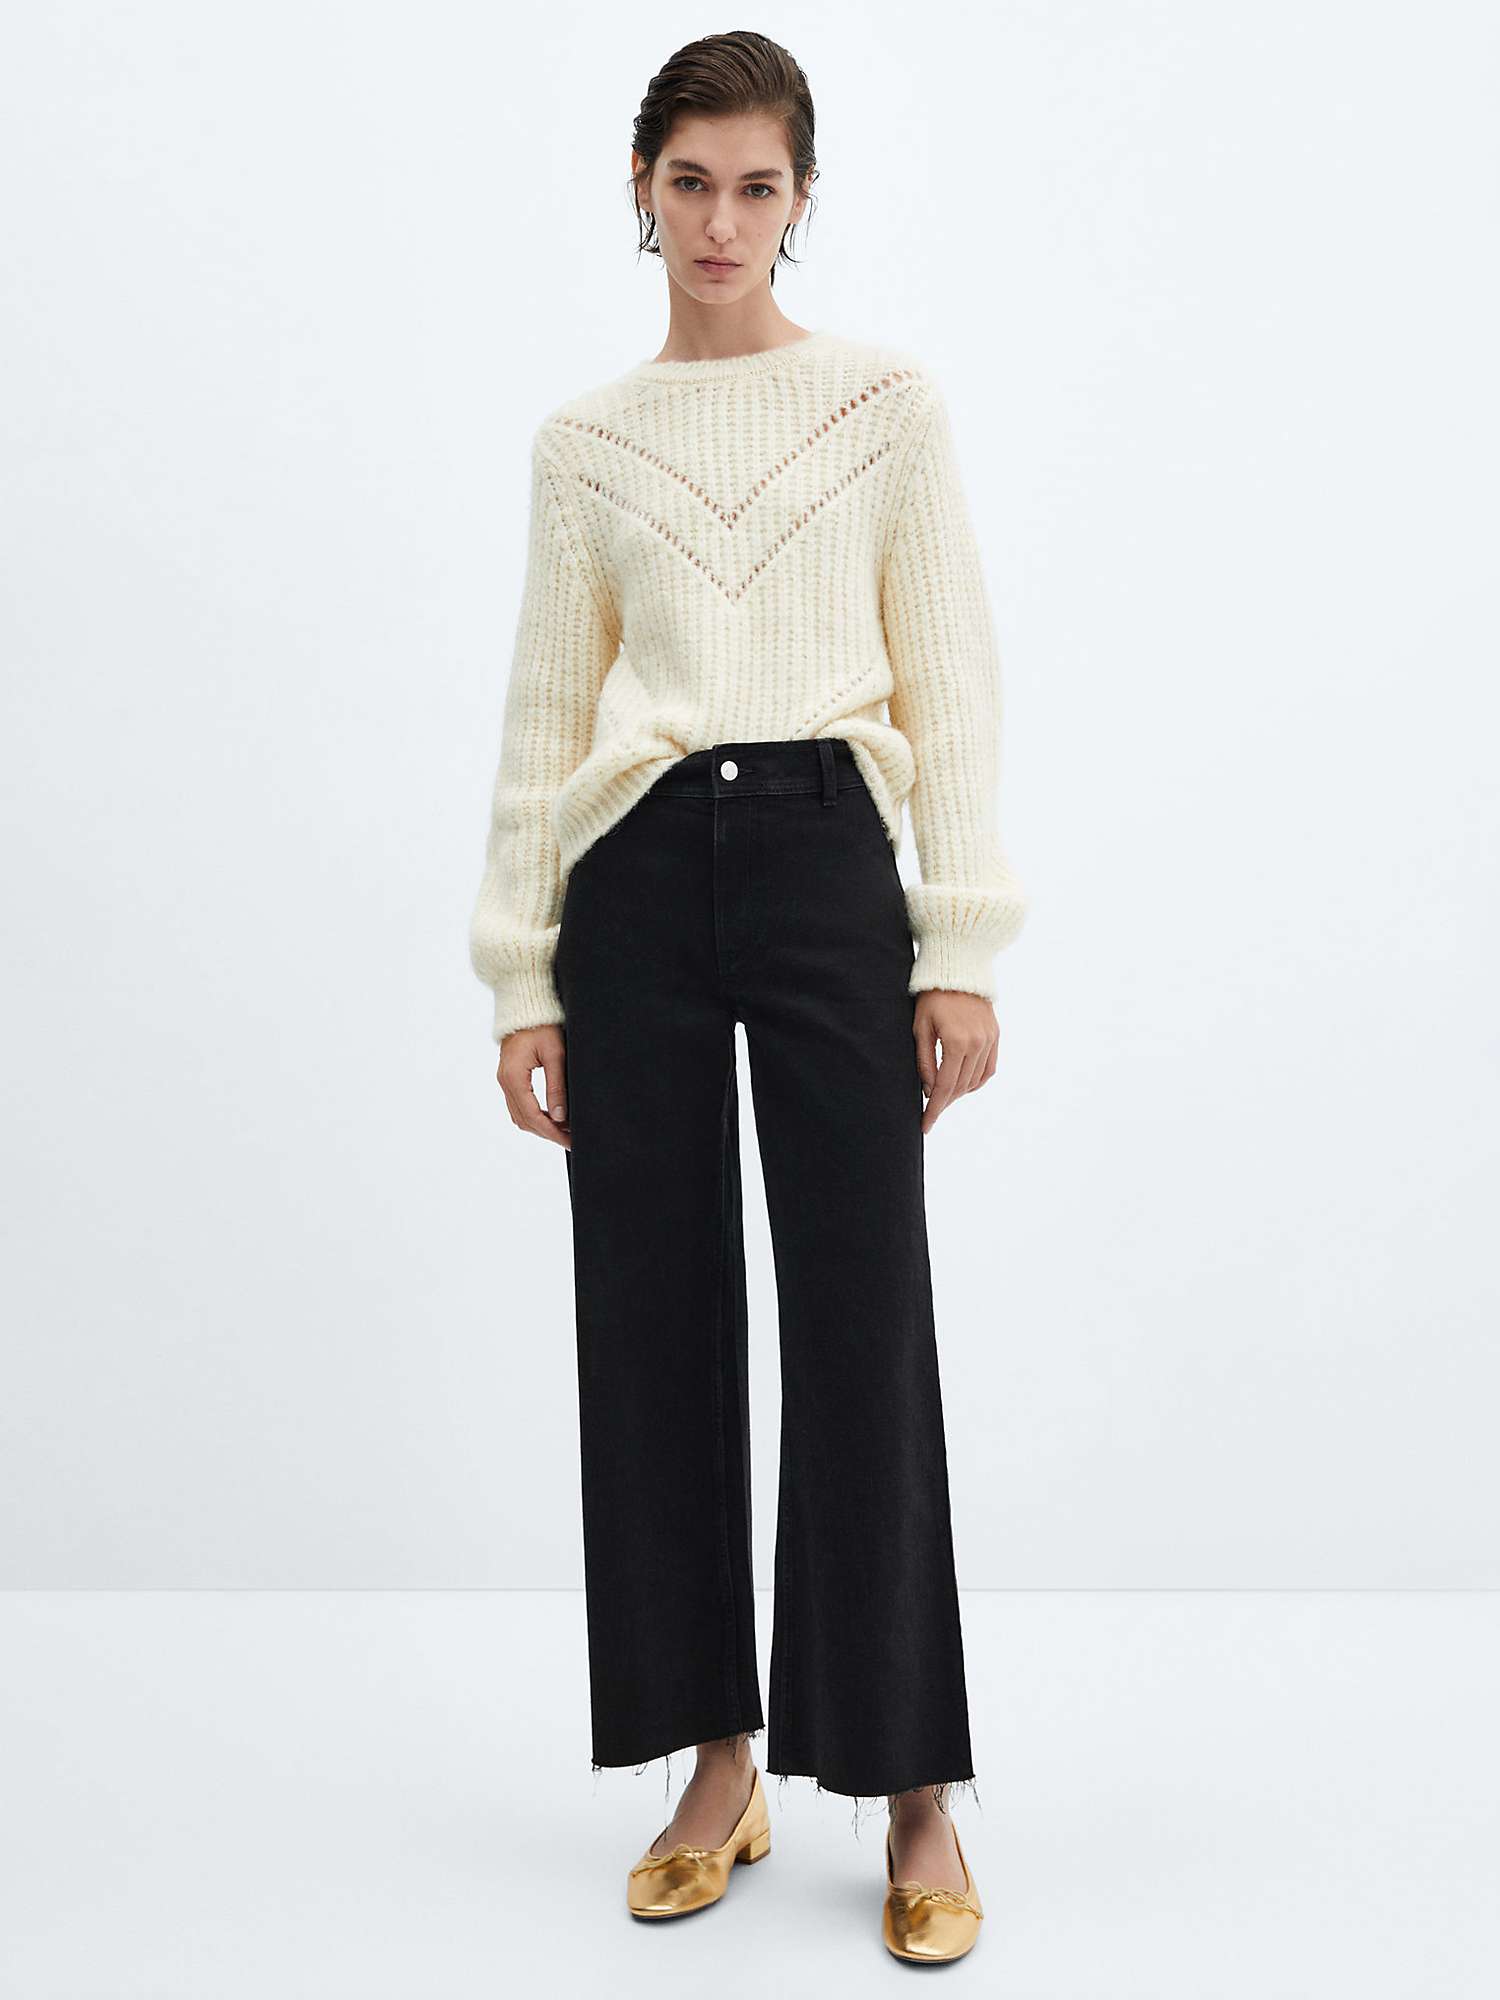 Buy Mango Catherin Jeans Culotte High Waist Online at johnlewis.com